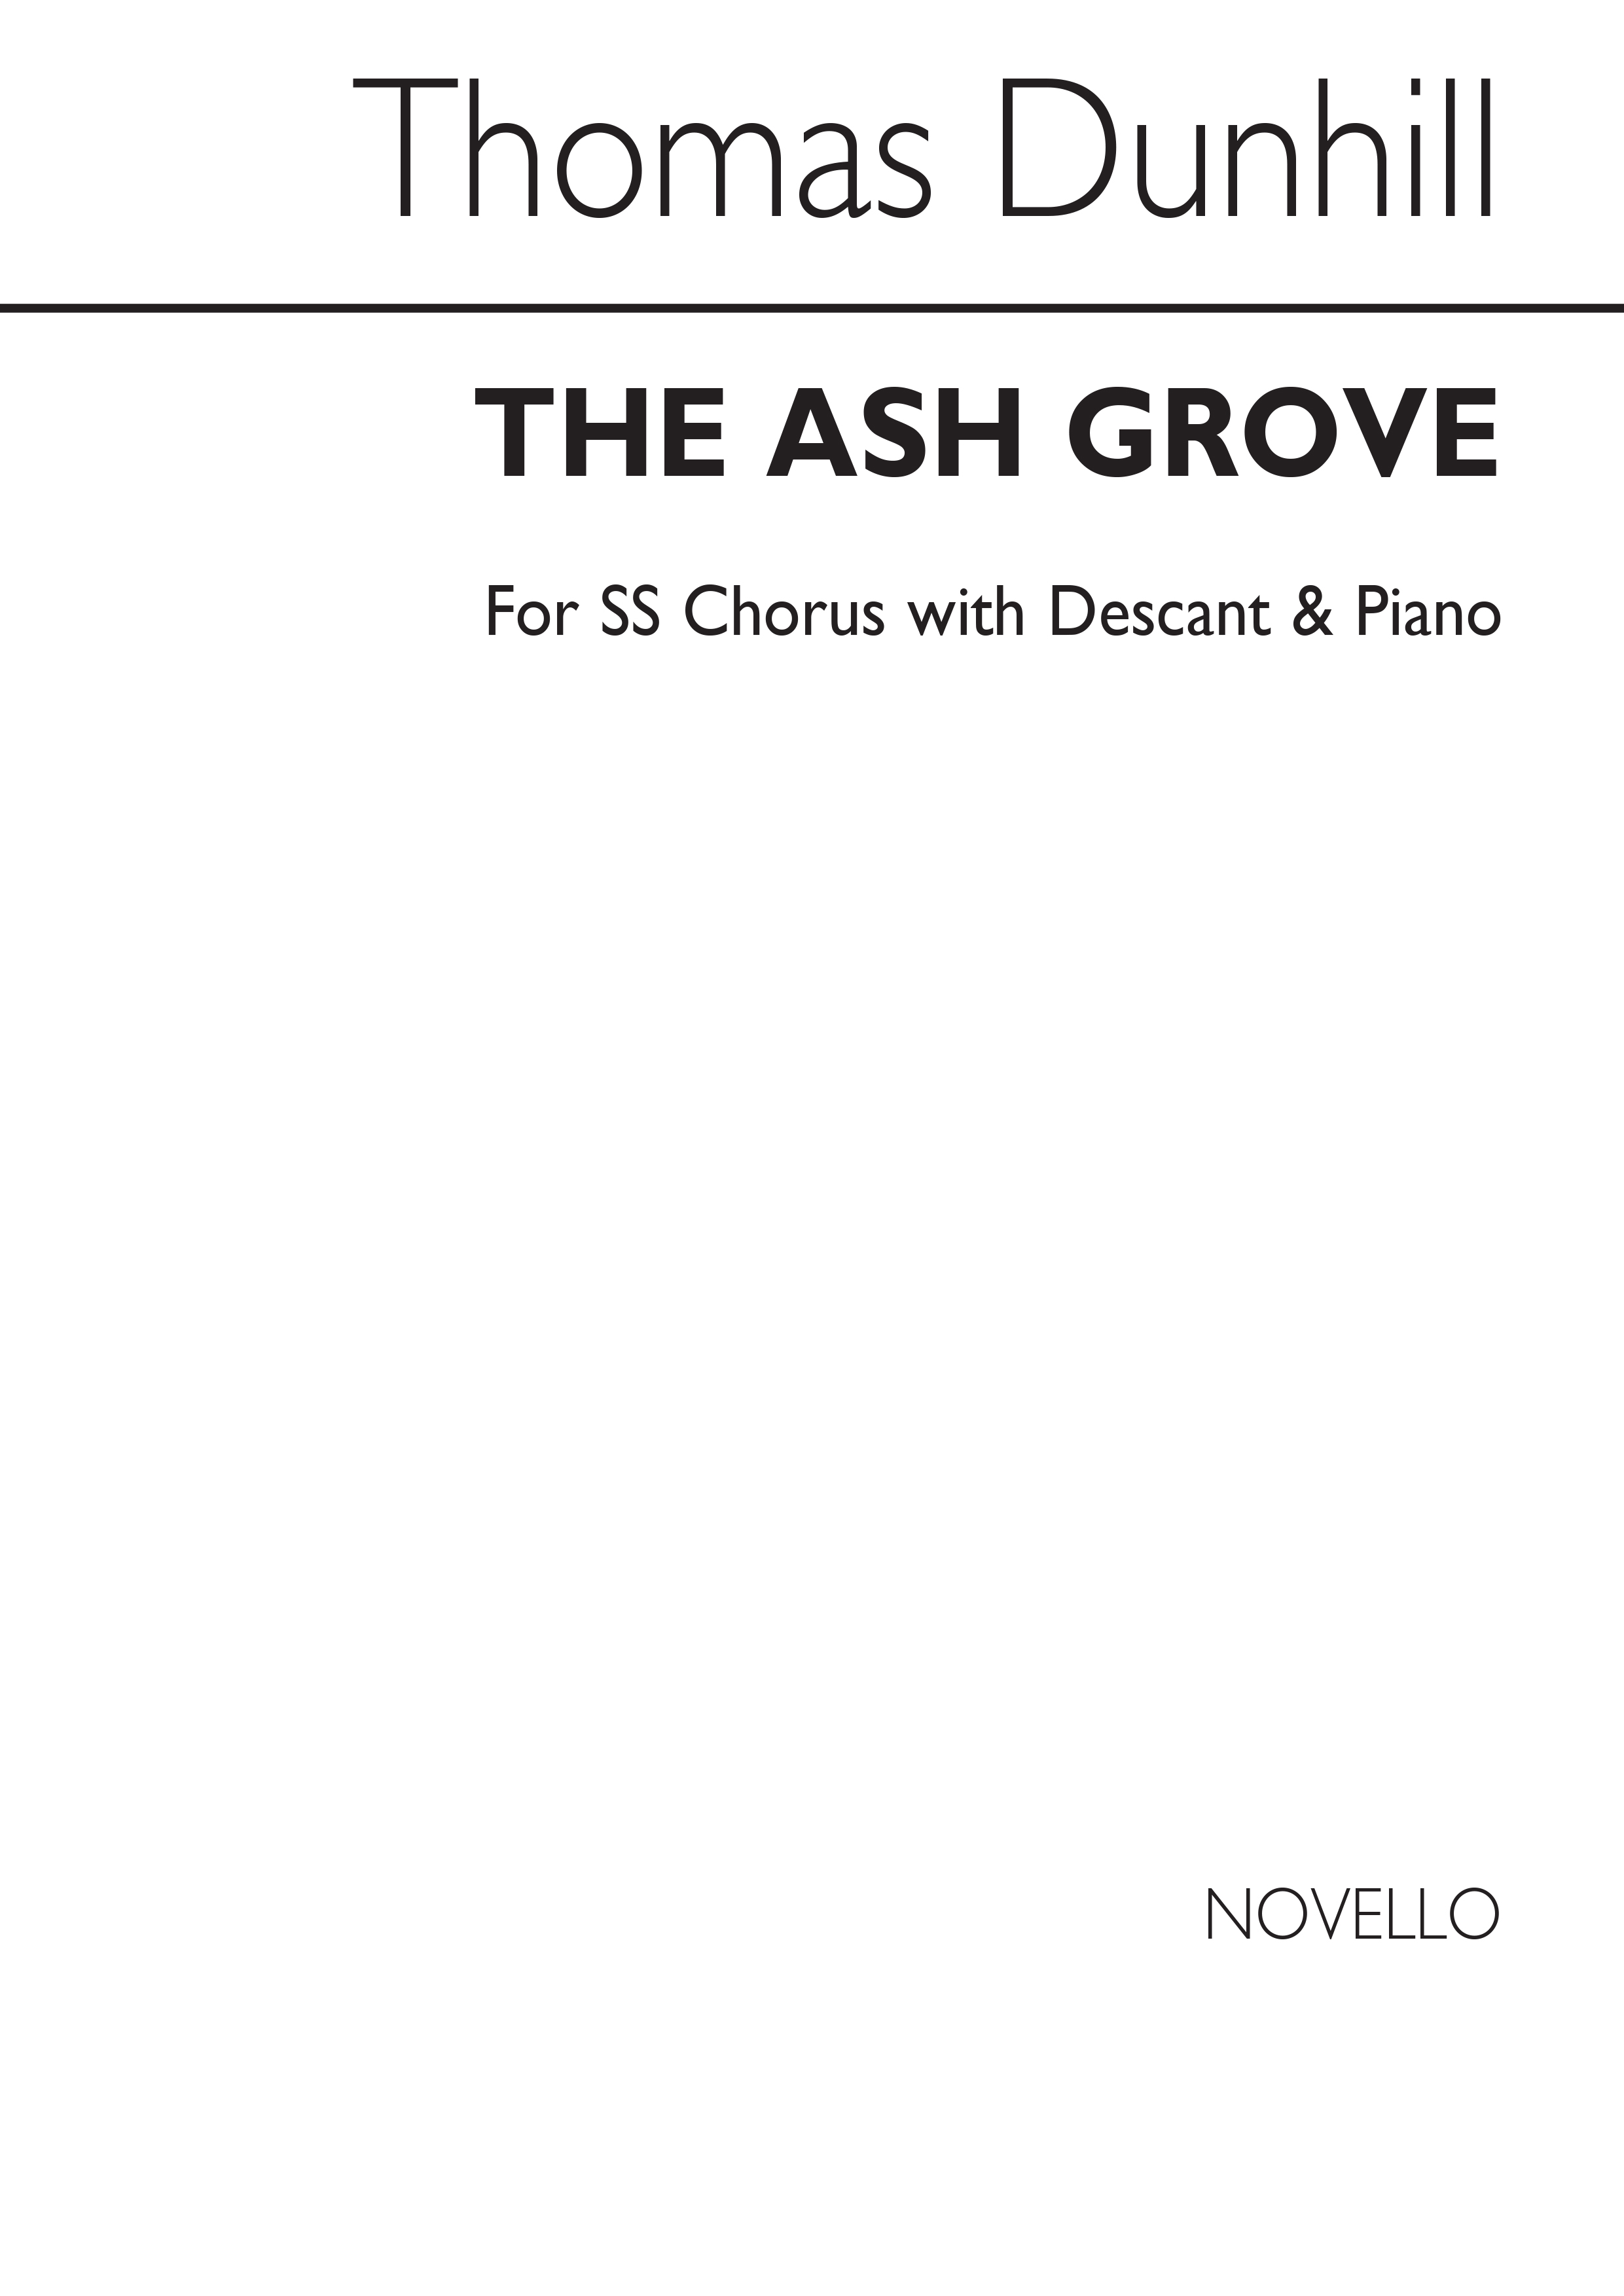 Dunhill: The Ash Grove for SS Chorus with Descant and Piano acc.